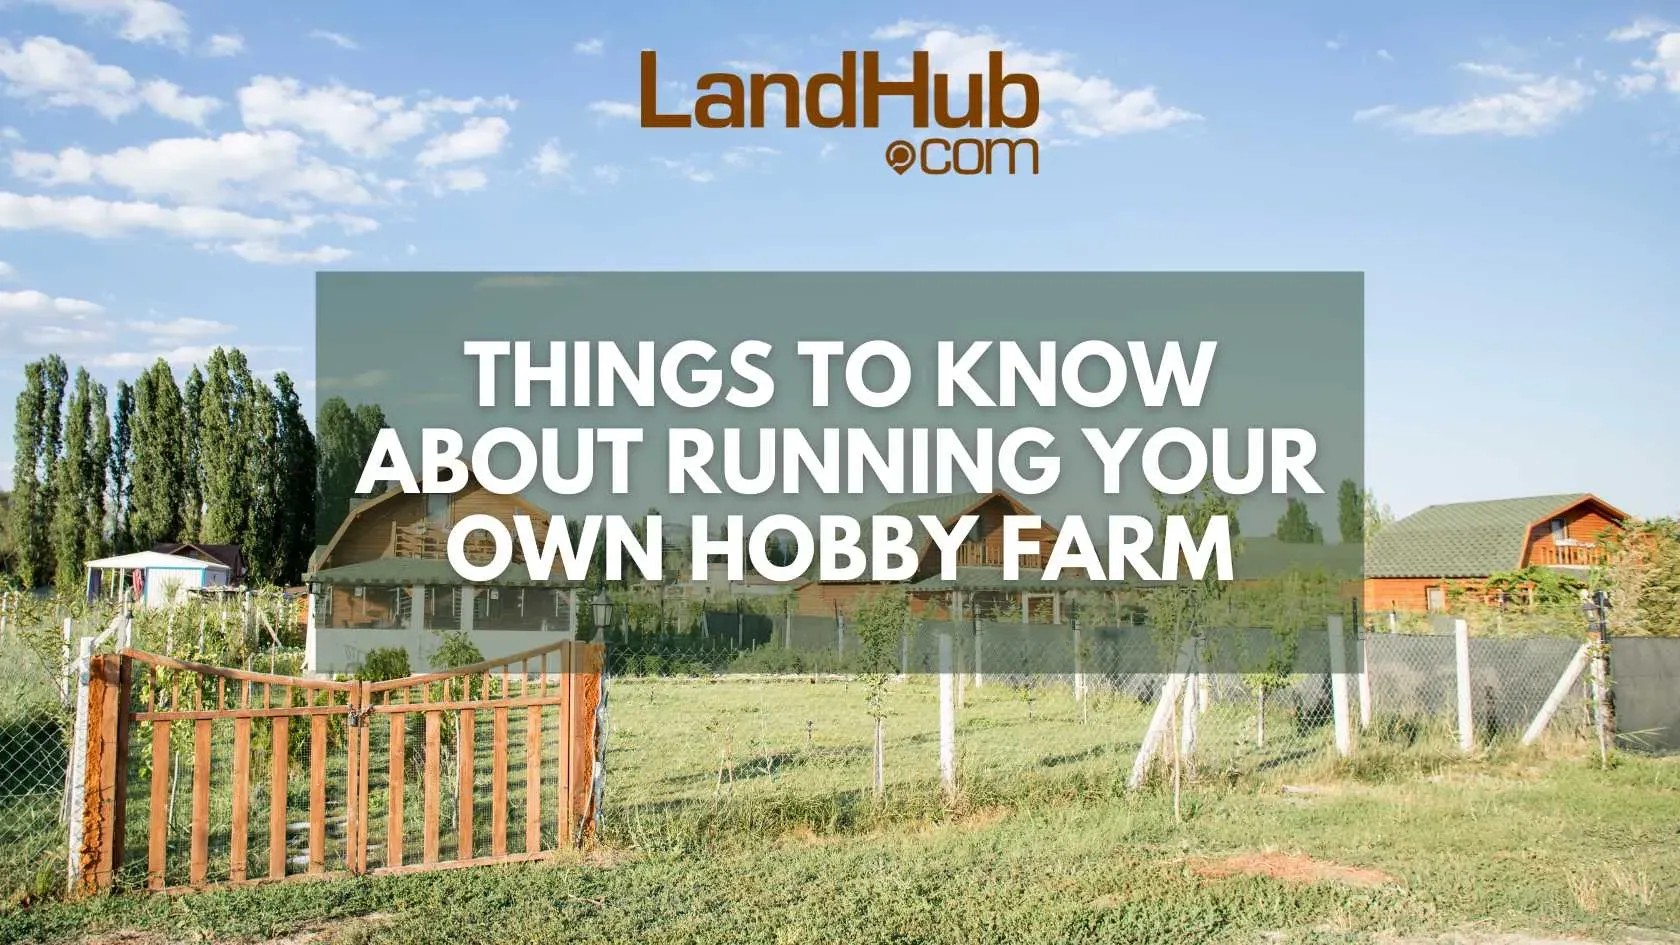 Things to Know About Running Your Own Hobby Farm